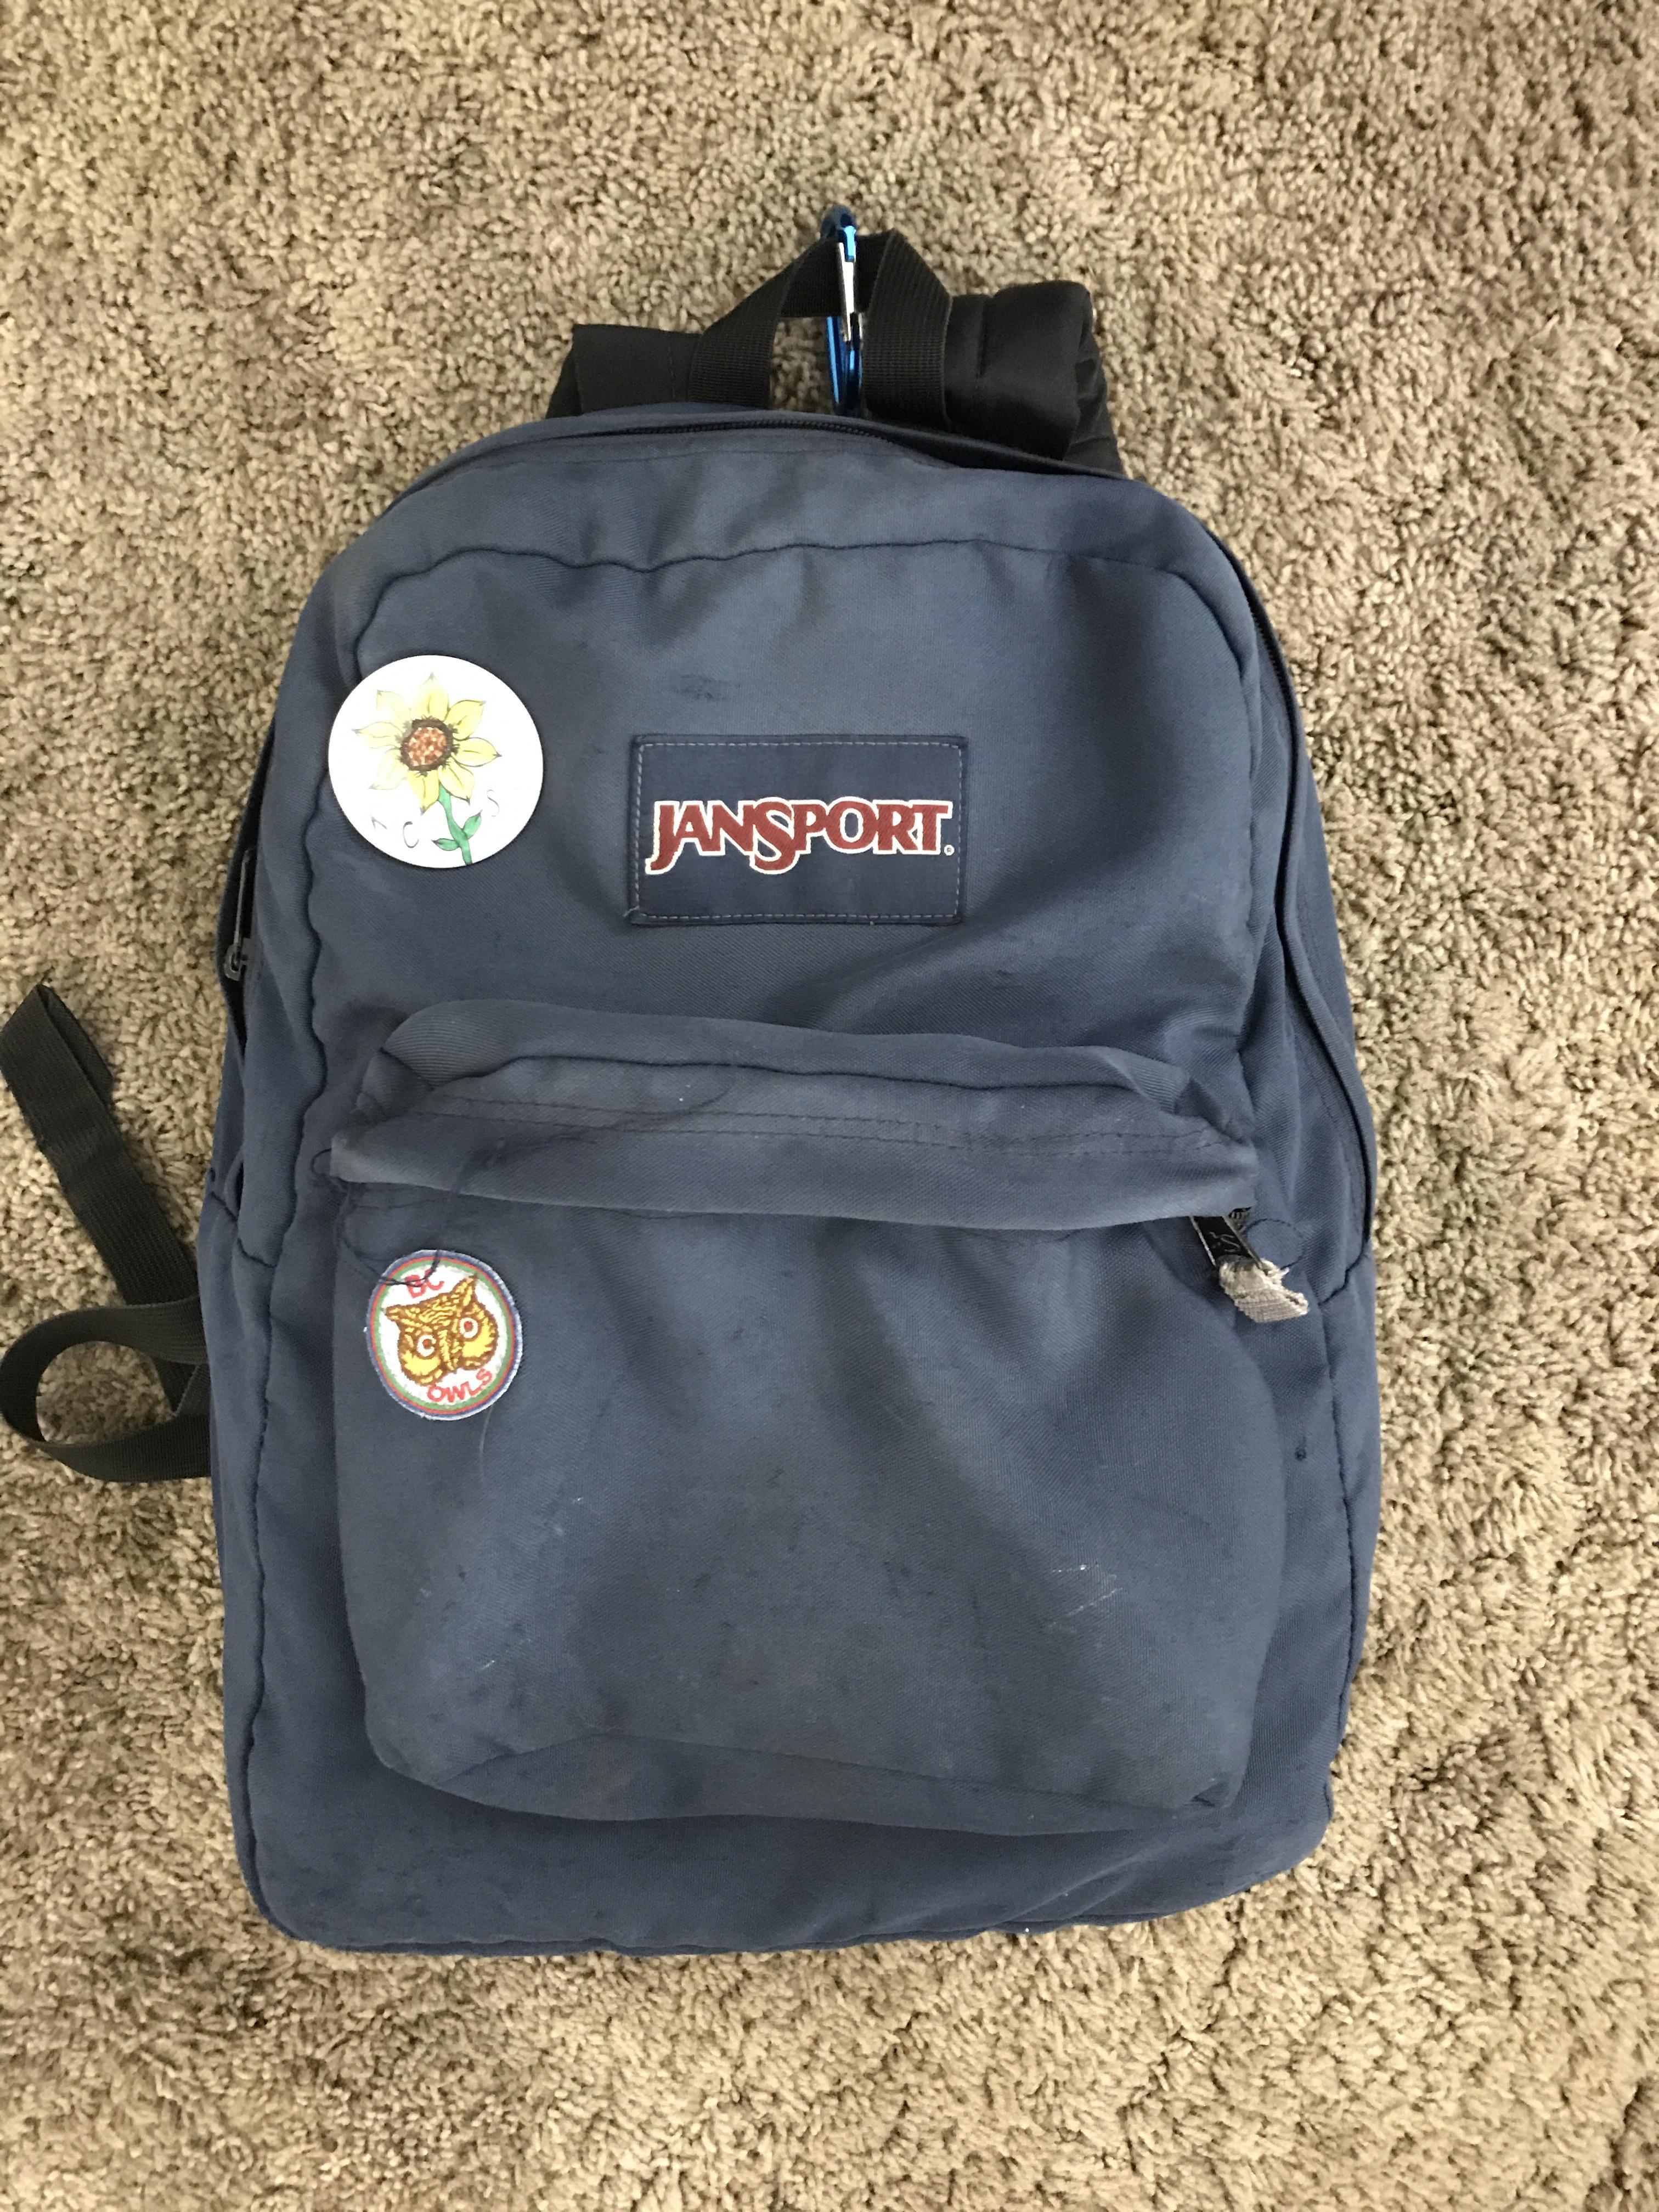 Old JanSport Logo - My 15 year old jansport it's gotten me through middle school, high ...